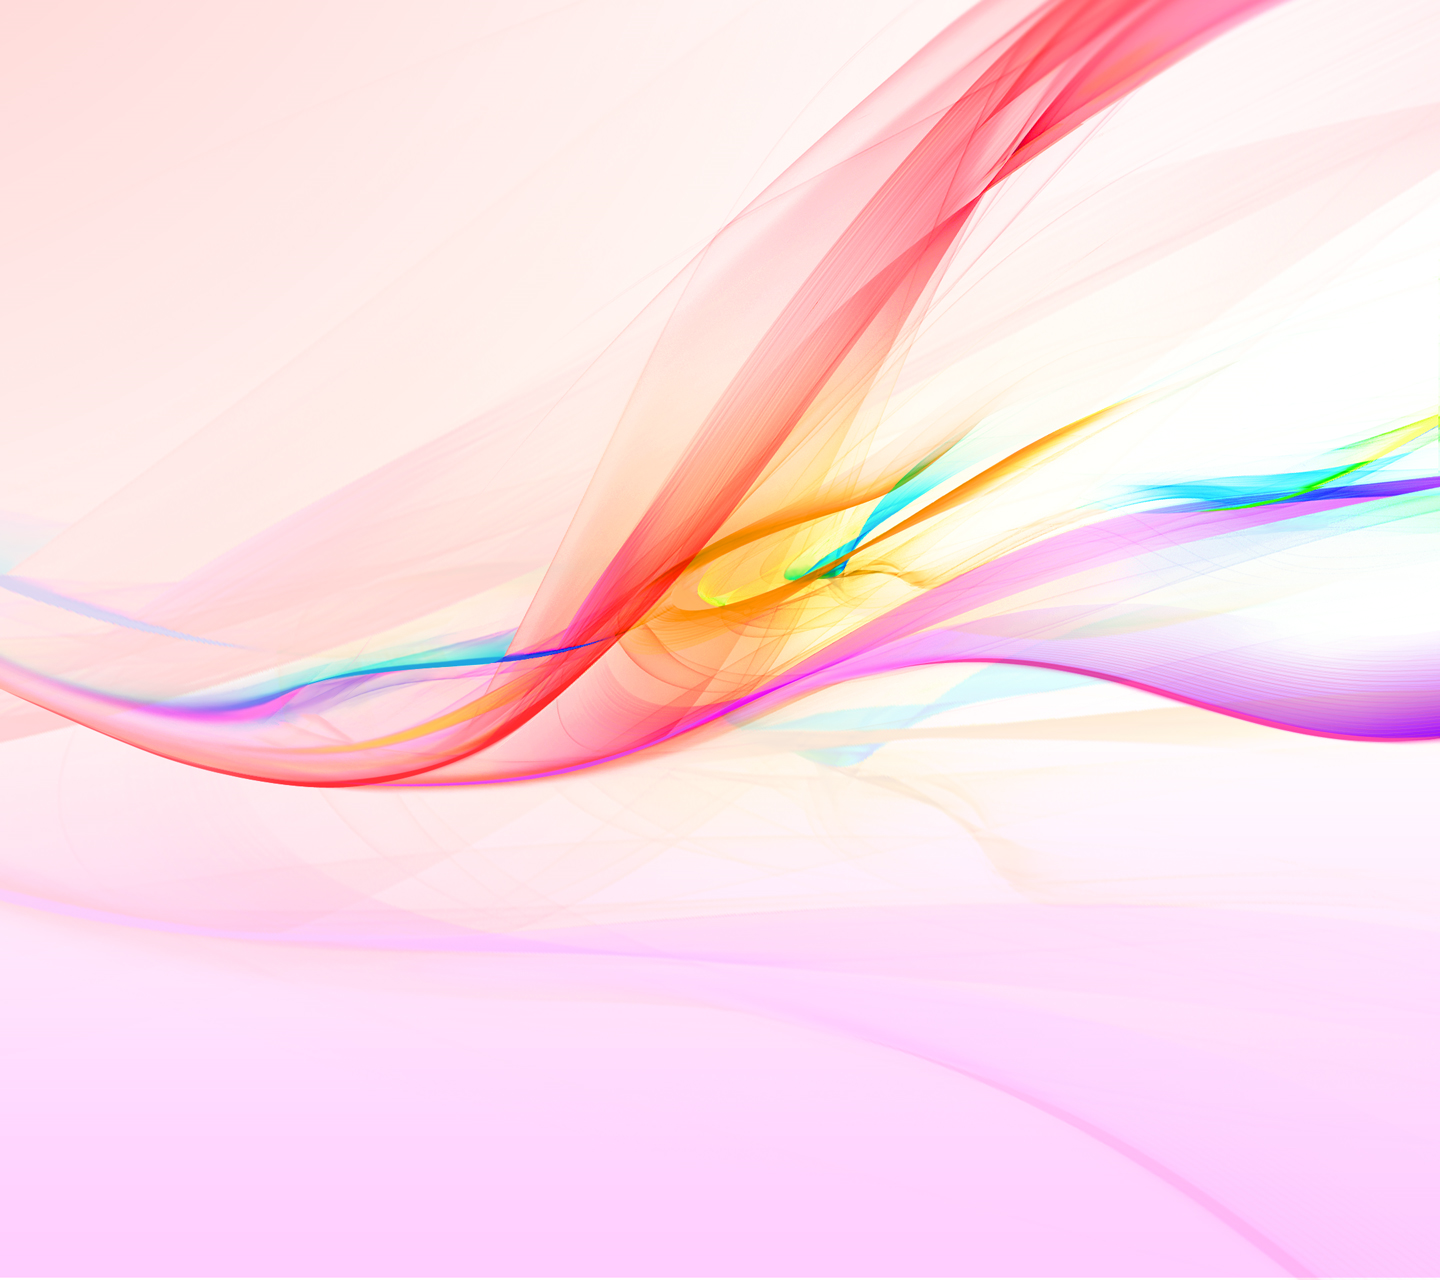 You May Also Like Sony Xperia Z1 Stock Wallpaper